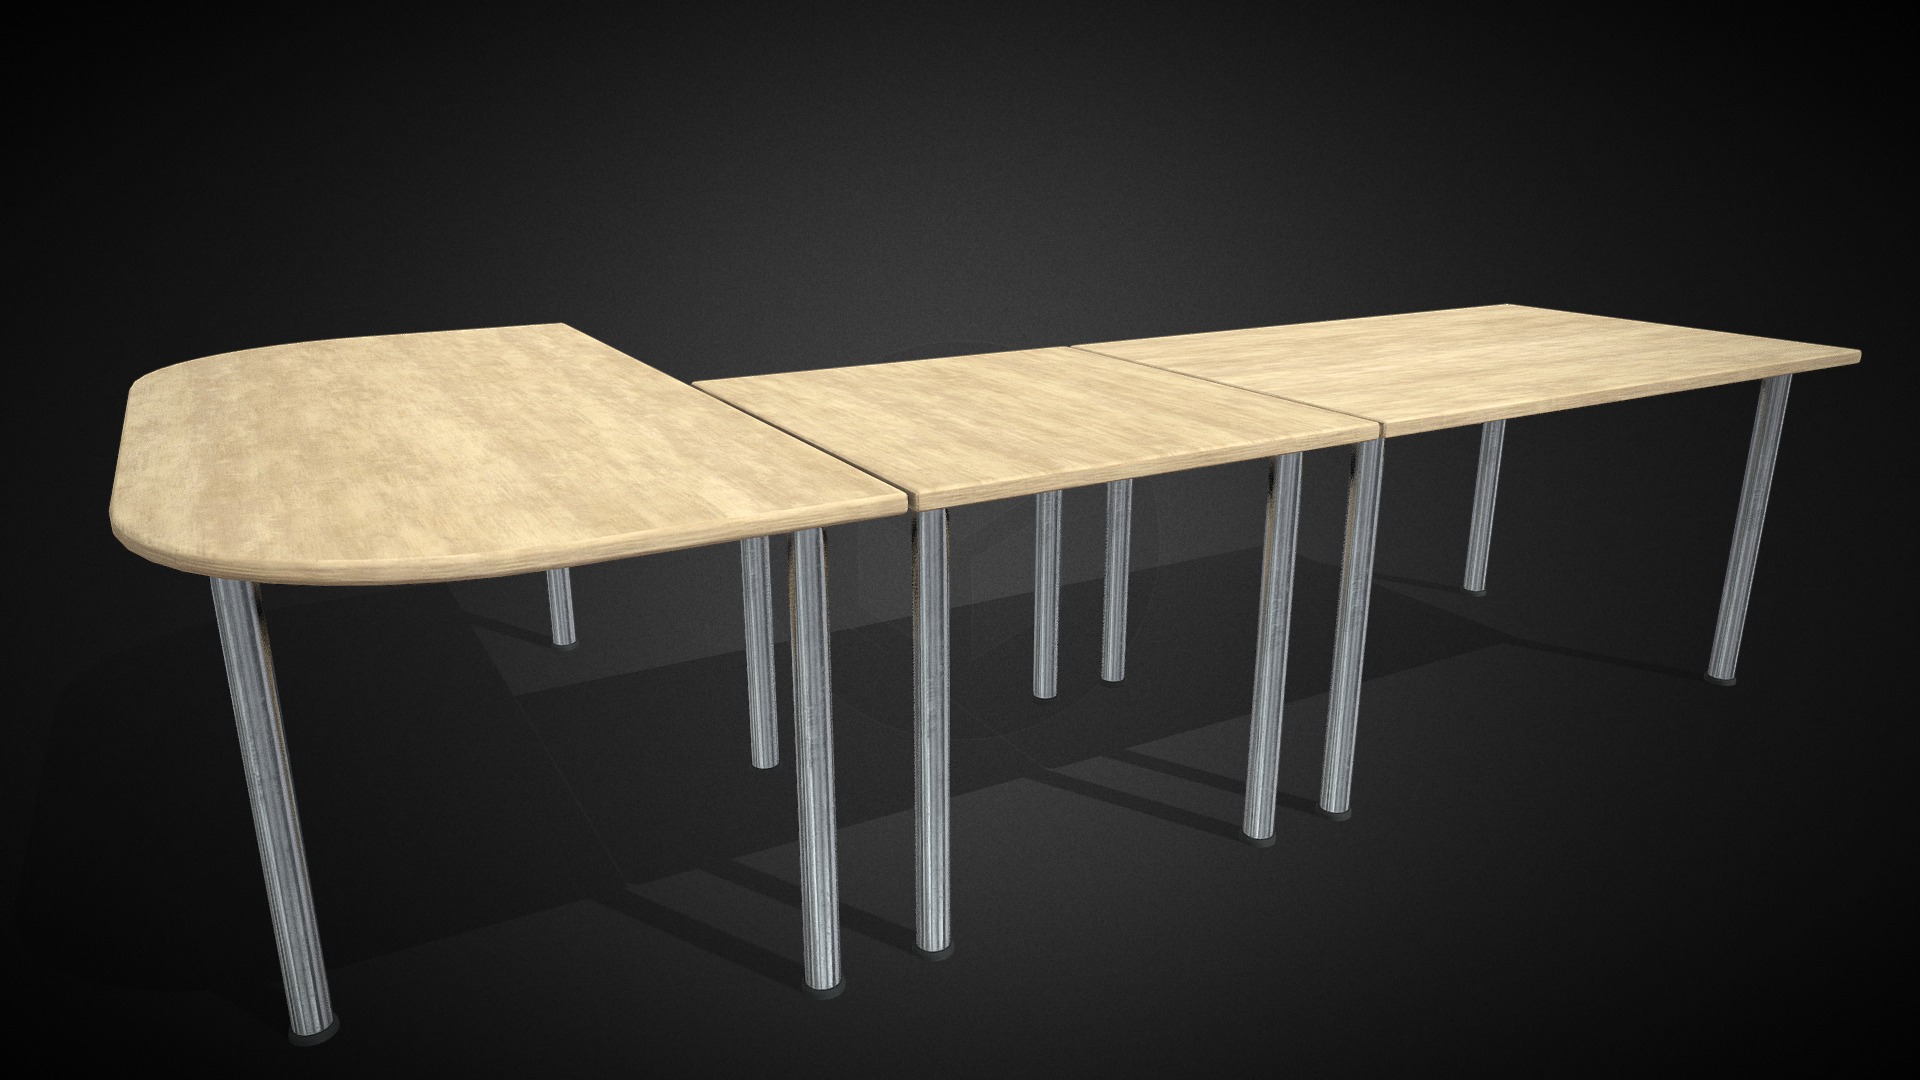 3D model Table_conf_kit - This is a 3D model of the Table_conf_kit. The 3D model is about a table with a chair.